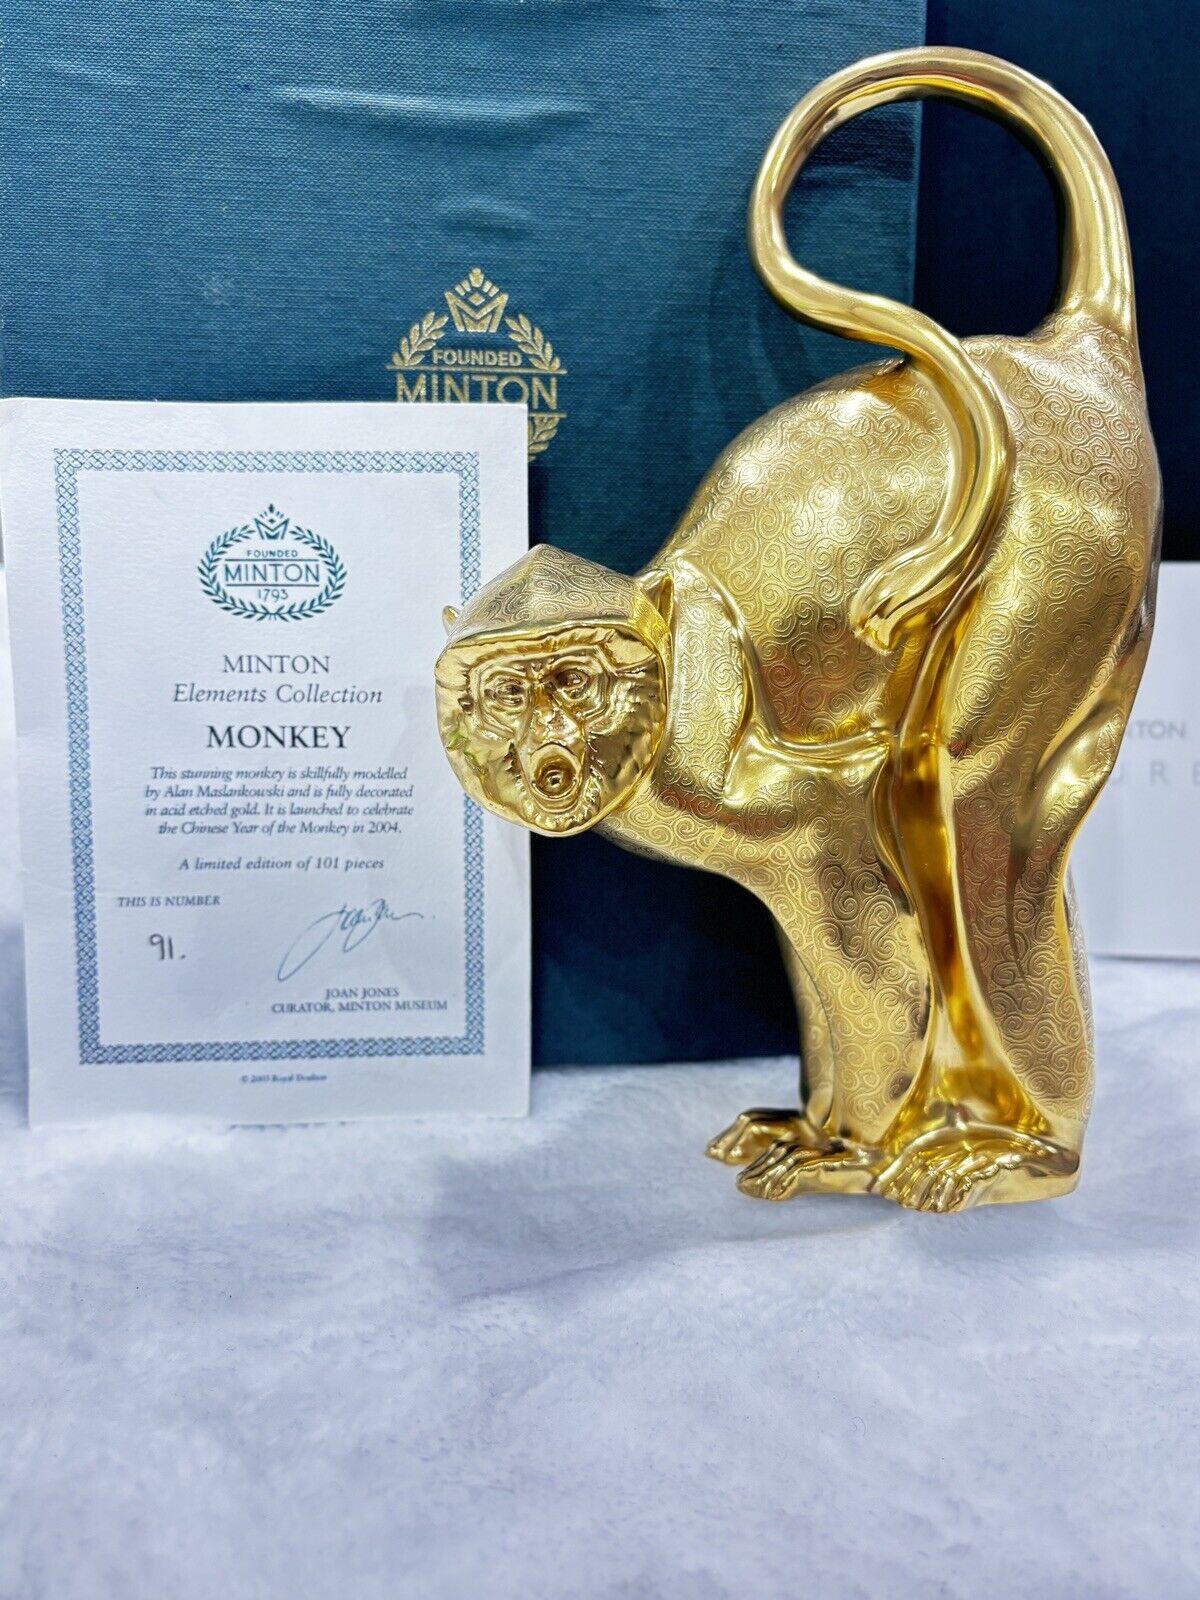 Minton Gold Monkey Figurine #91 of 101 Made. Orig Box And Signed Cert.